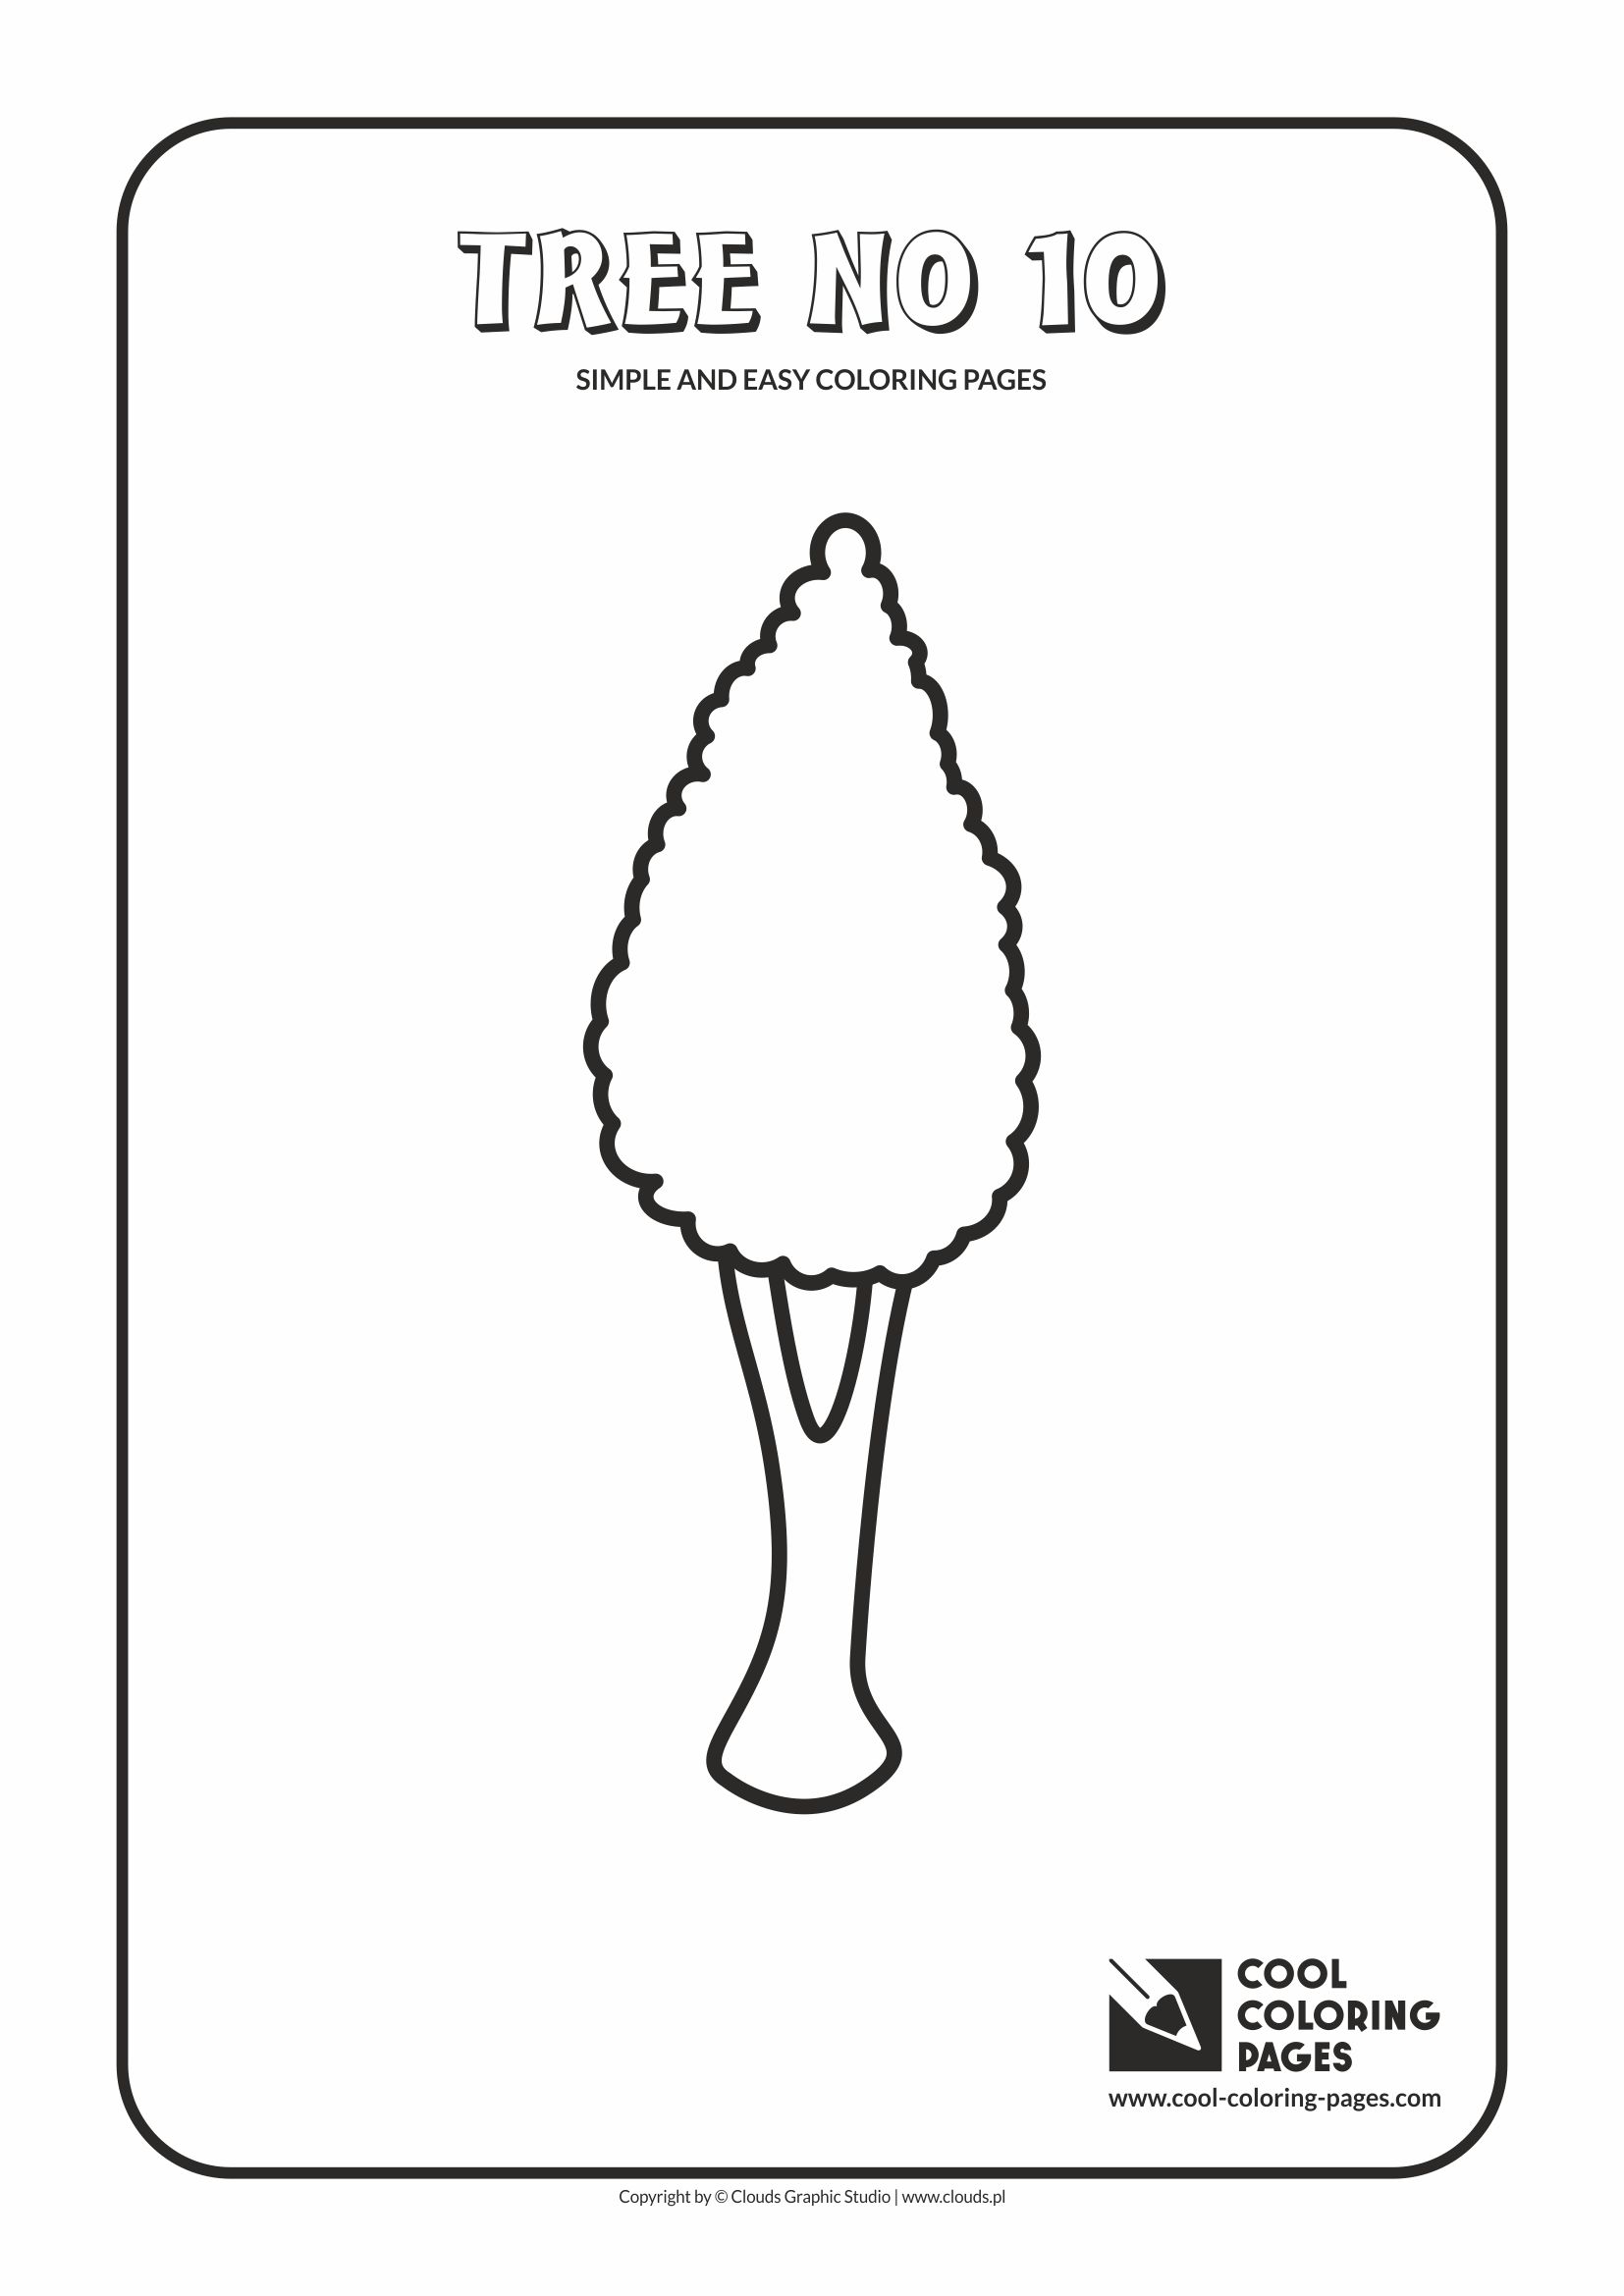 Simple and easy coloring pages for toddlers - Tree no 10